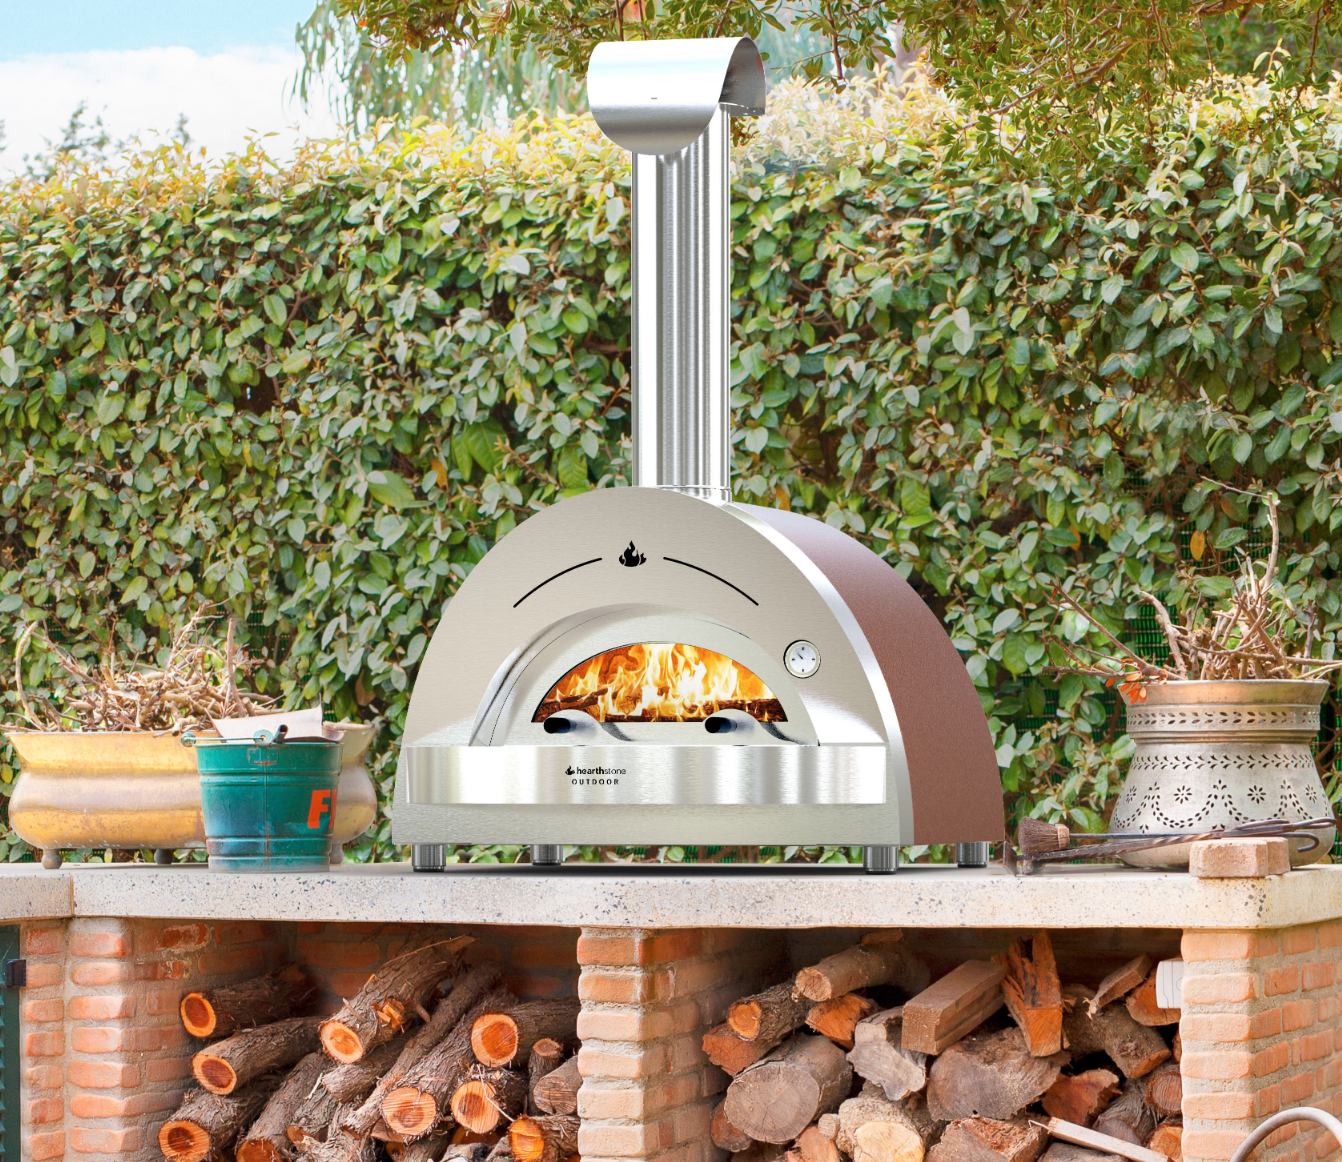 Hearthstone Outdoor Pizza Ovens, Hearthstone Fireplace And Patio